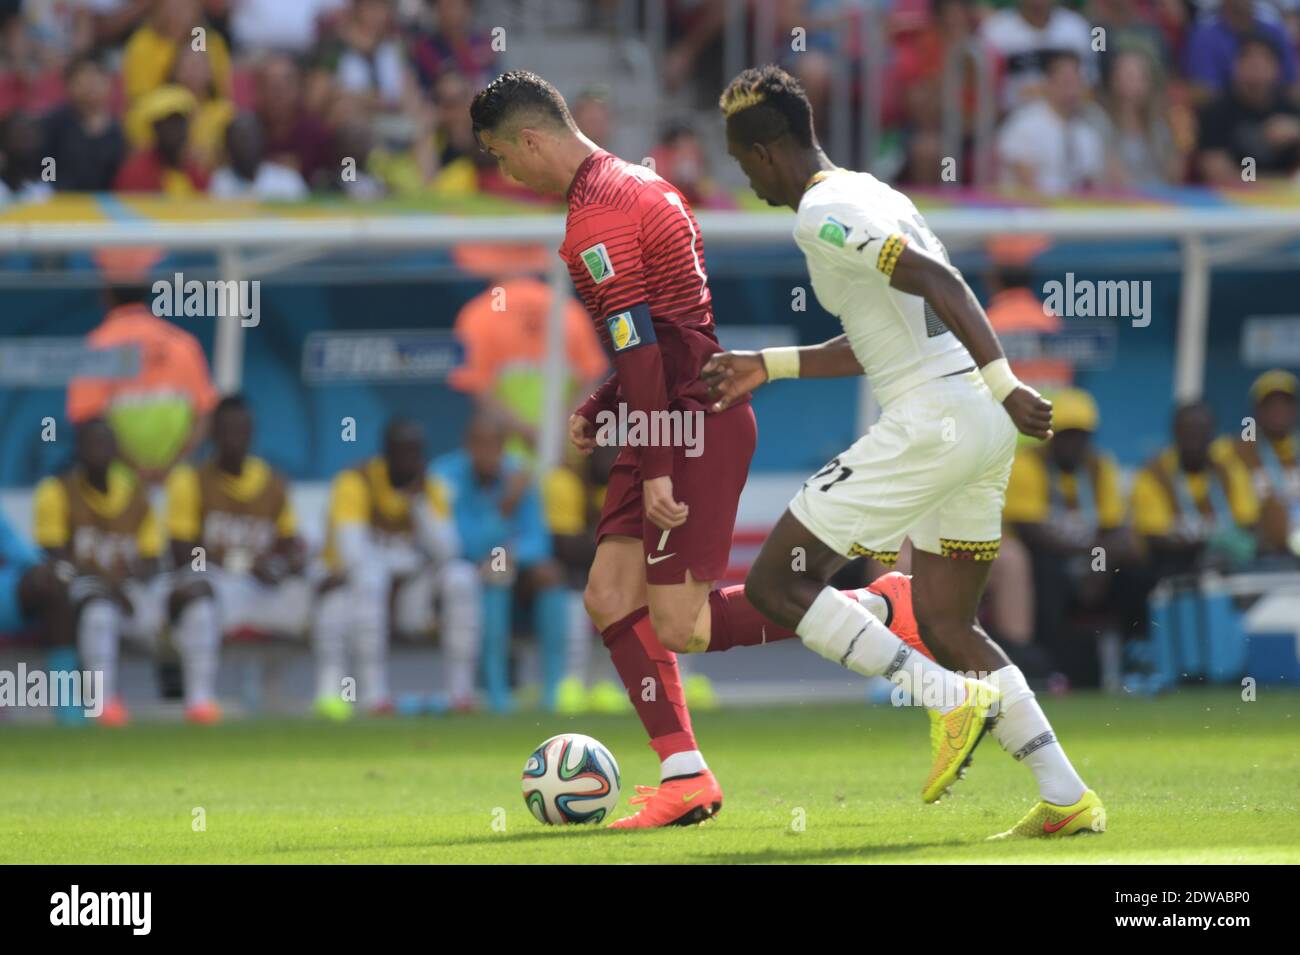 Portugal's Cristiano Ronaldo during Soccer World Cup 2014 First round Group G match Ghana v Portugal at National Stadium, Brasilia, Brazil on June 26, 2014. Portugal won 2-1. Photo by Henri Szwarc/ABACAPRESS.COM Stock Photo